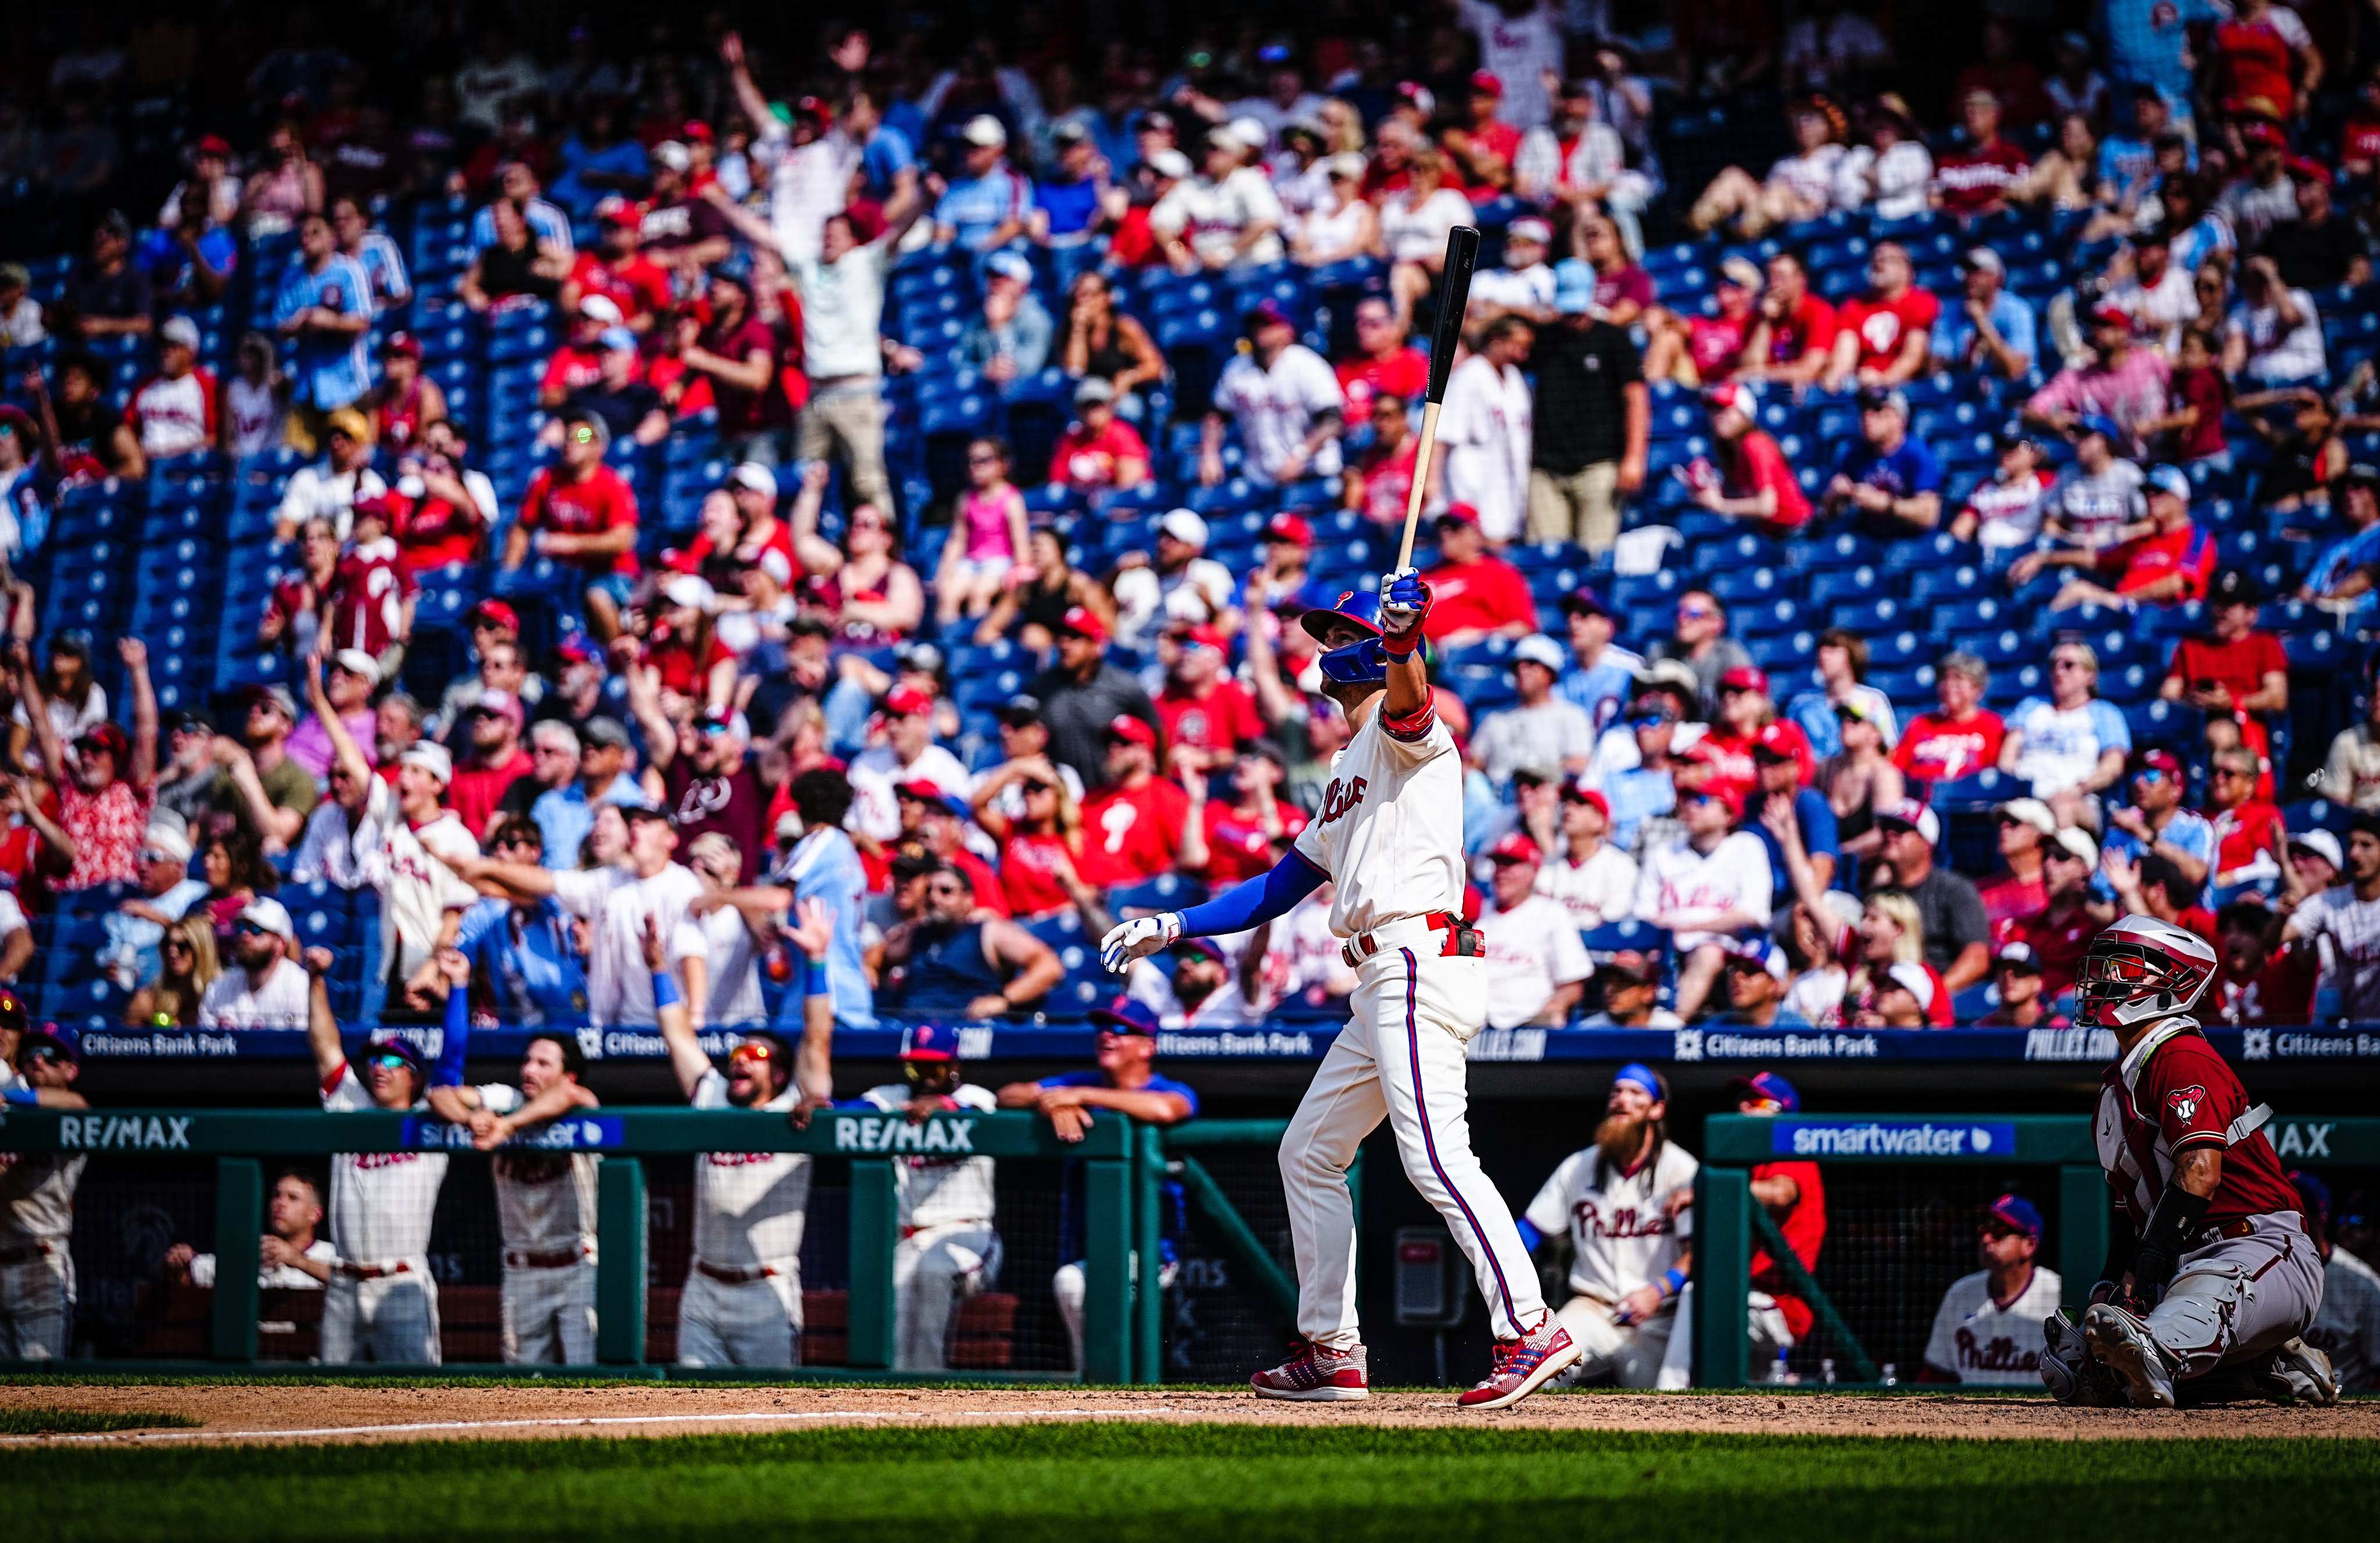 Phillies come from behind to beat D-backs 6-5 in 10 innings